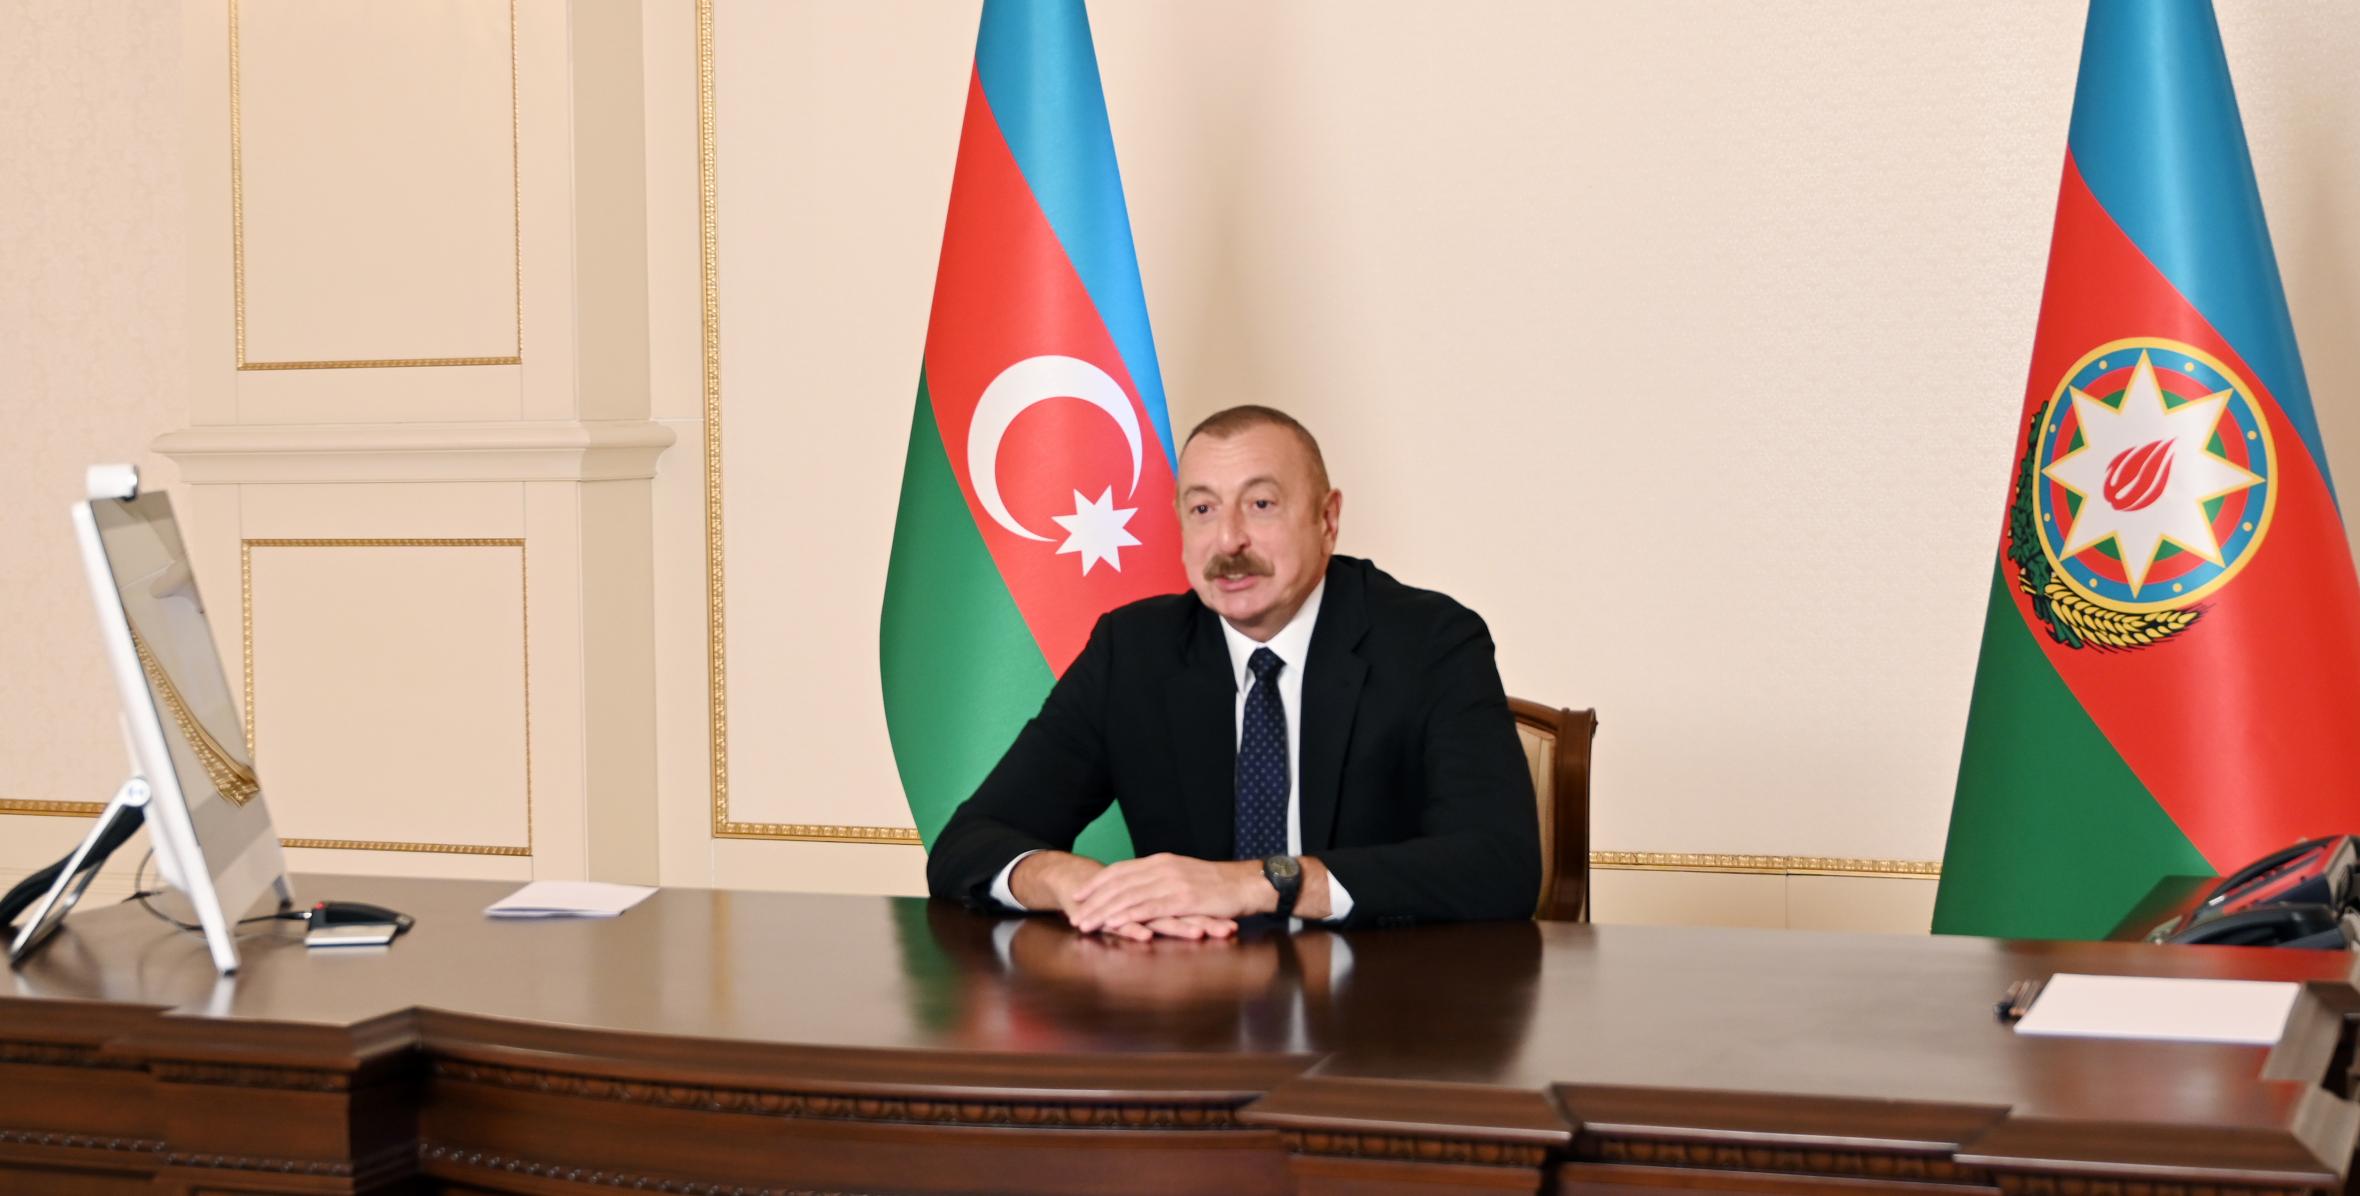 Ilham Aliyev met with President of World Economic Forum in video conference format